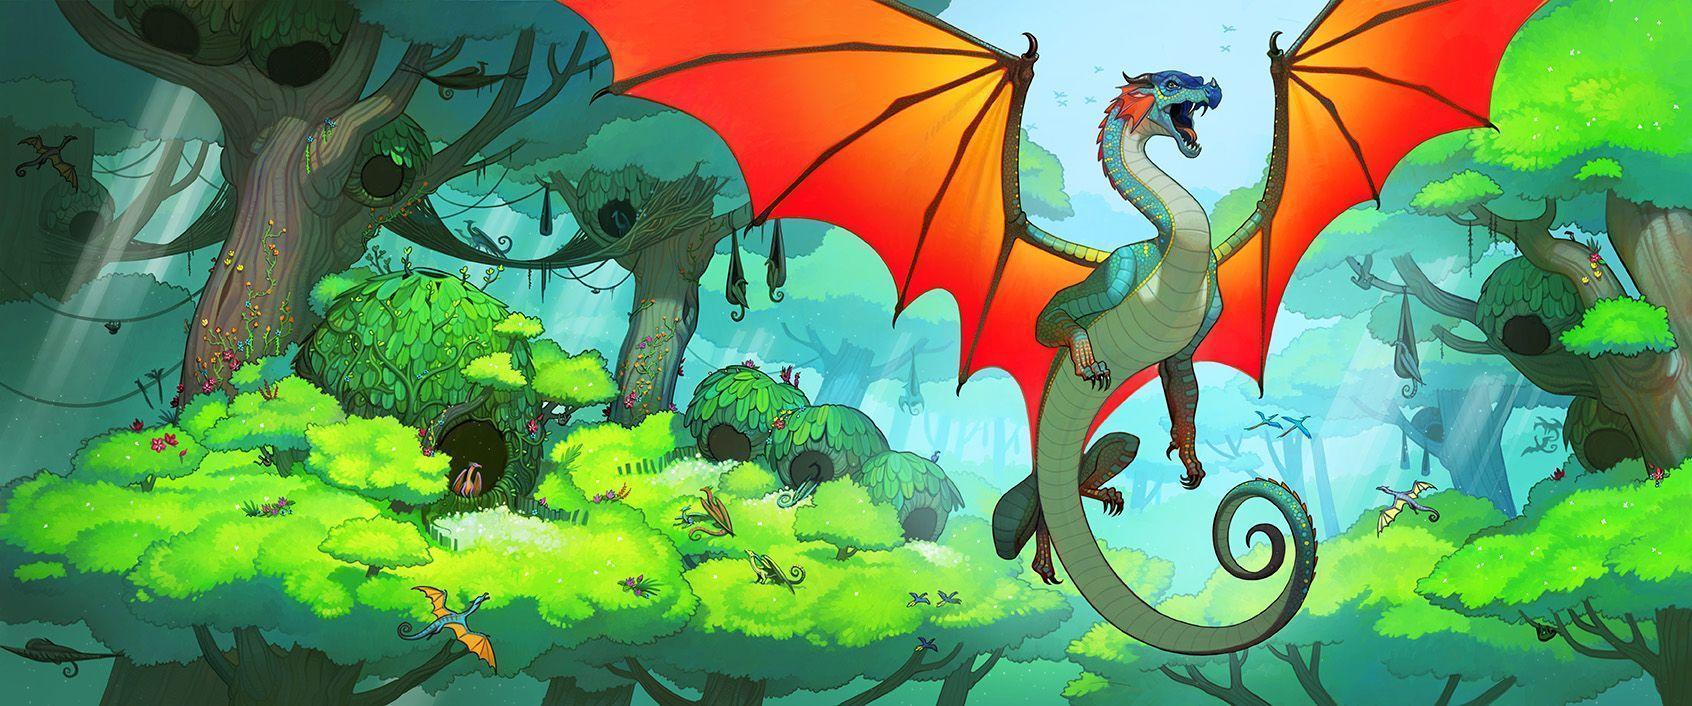 Wings Of Fire Dragons Wallpapers  Wallpaper Cave